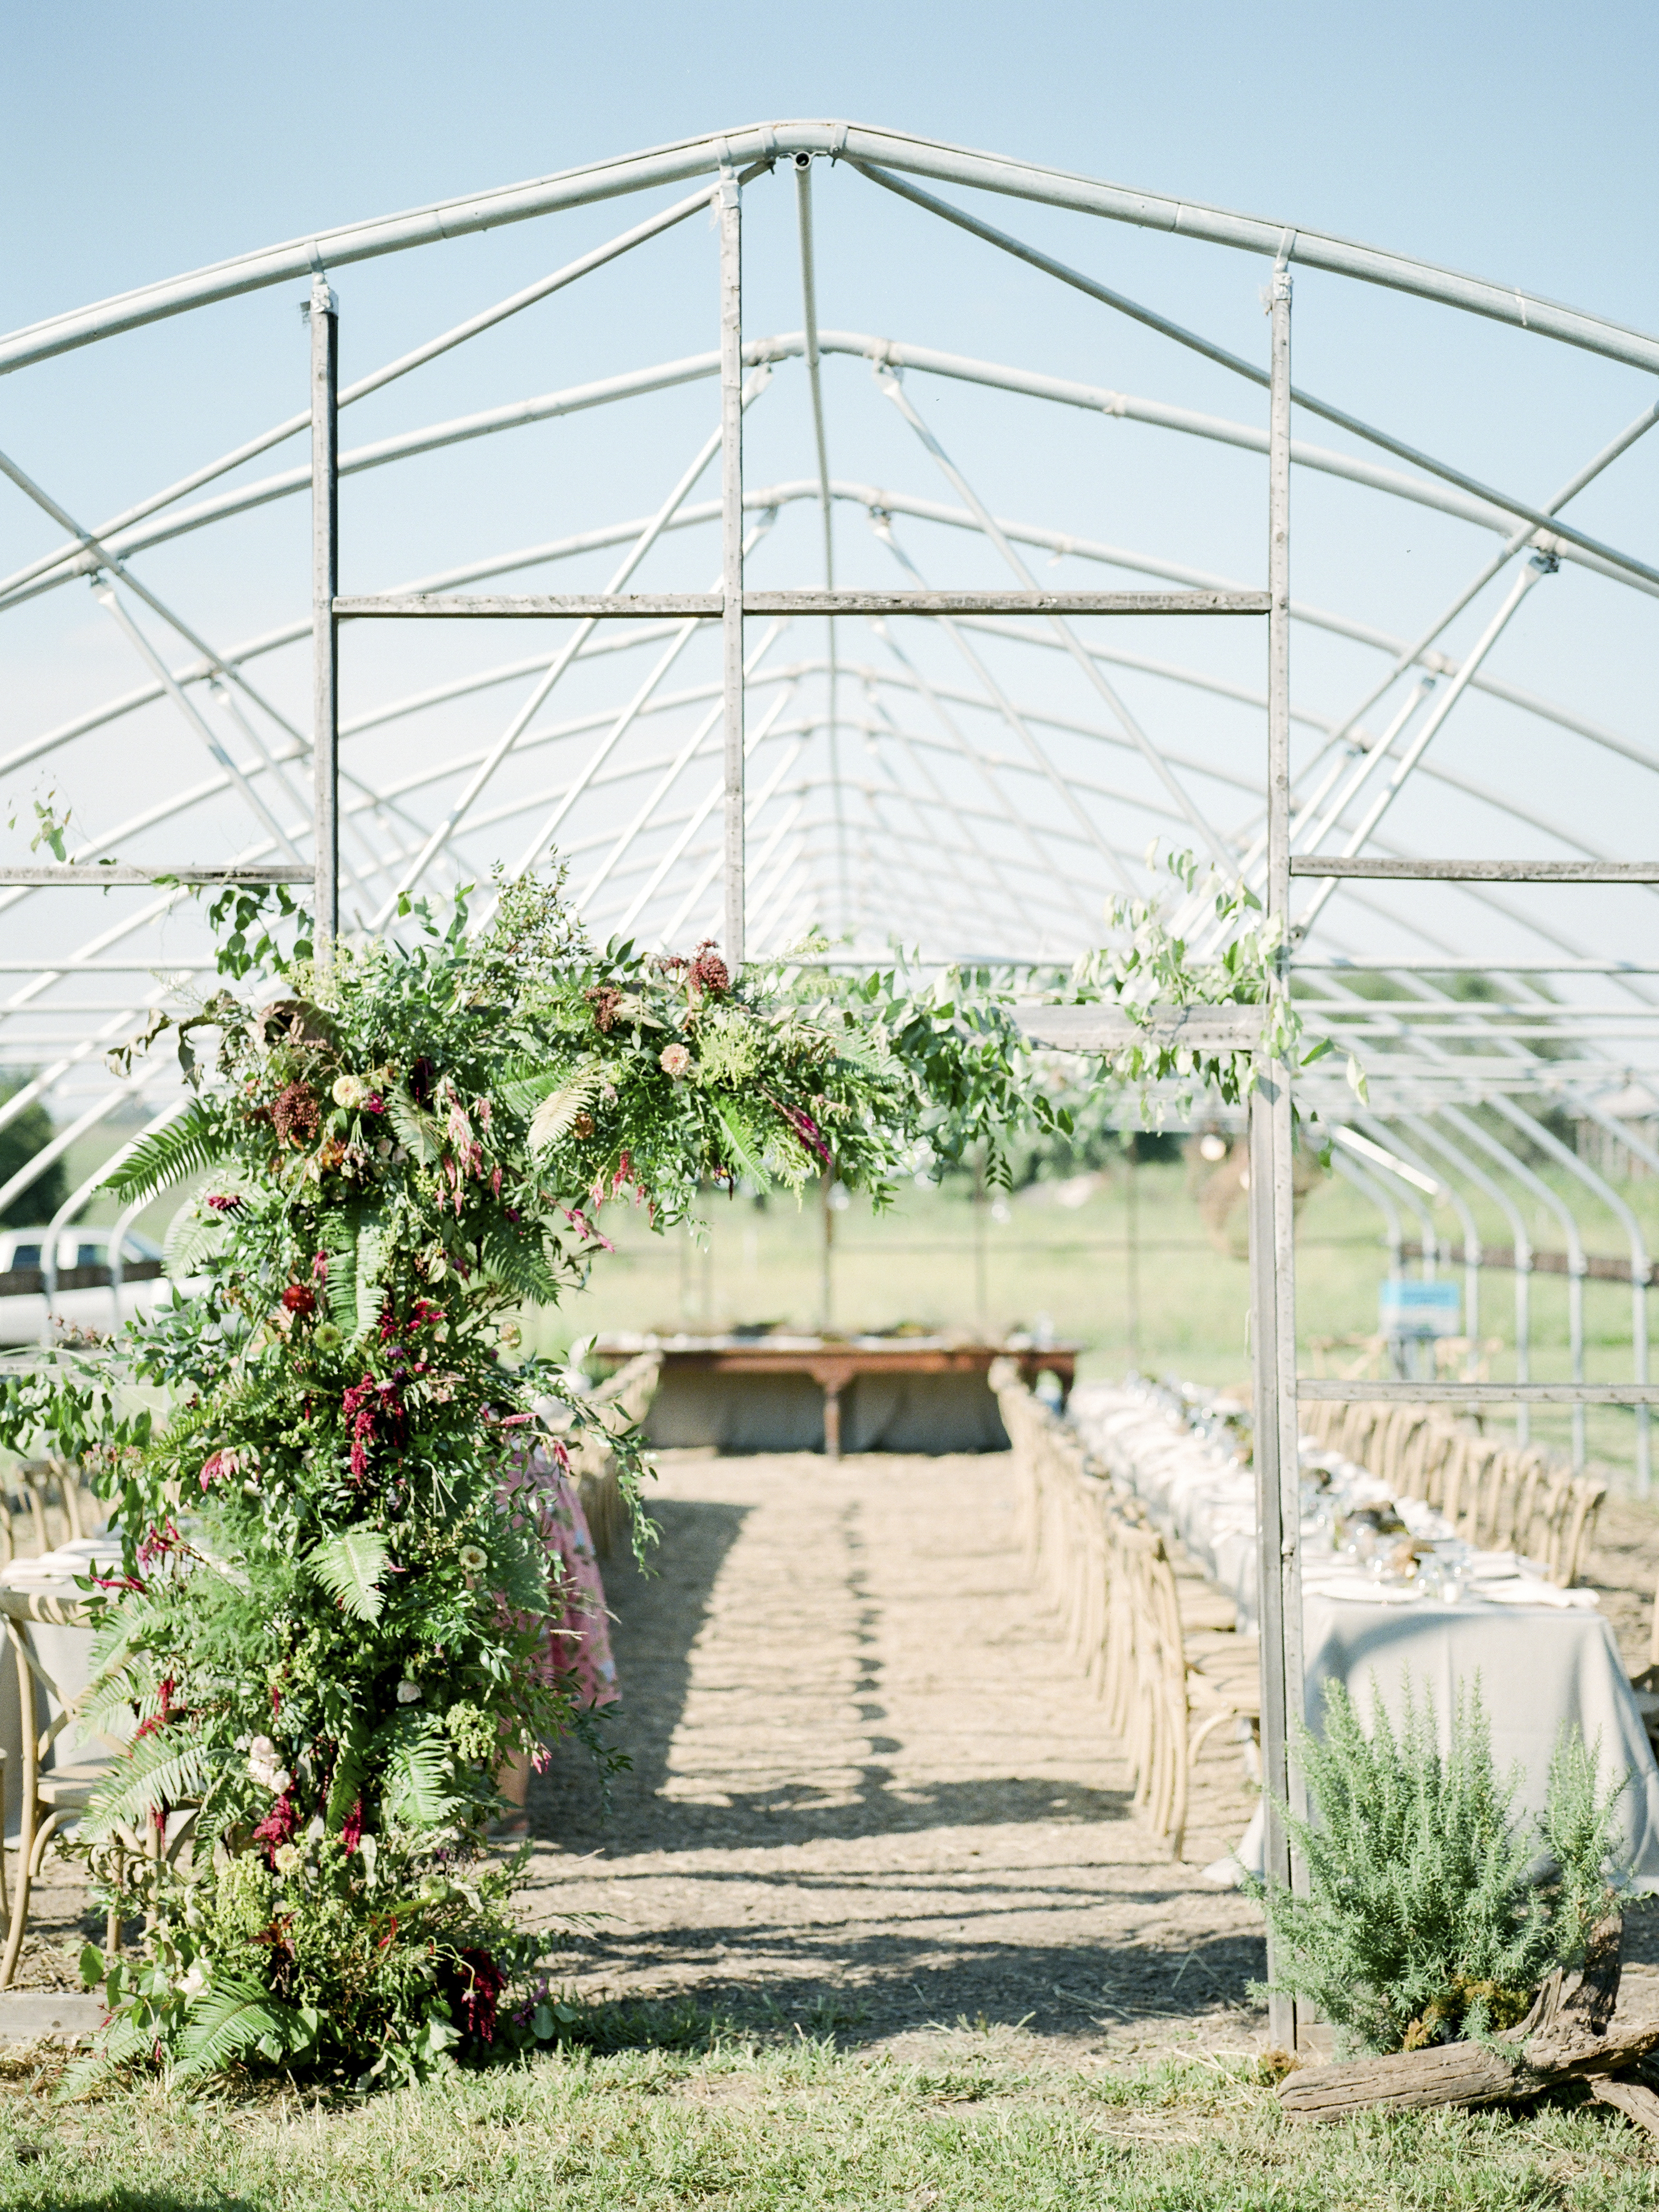 blue bell farm, farm to table, green house, events, wedding events, receptions, missouri wedding photography, reception hall, farm to table, sugarberry blooms, florals, fine art photography